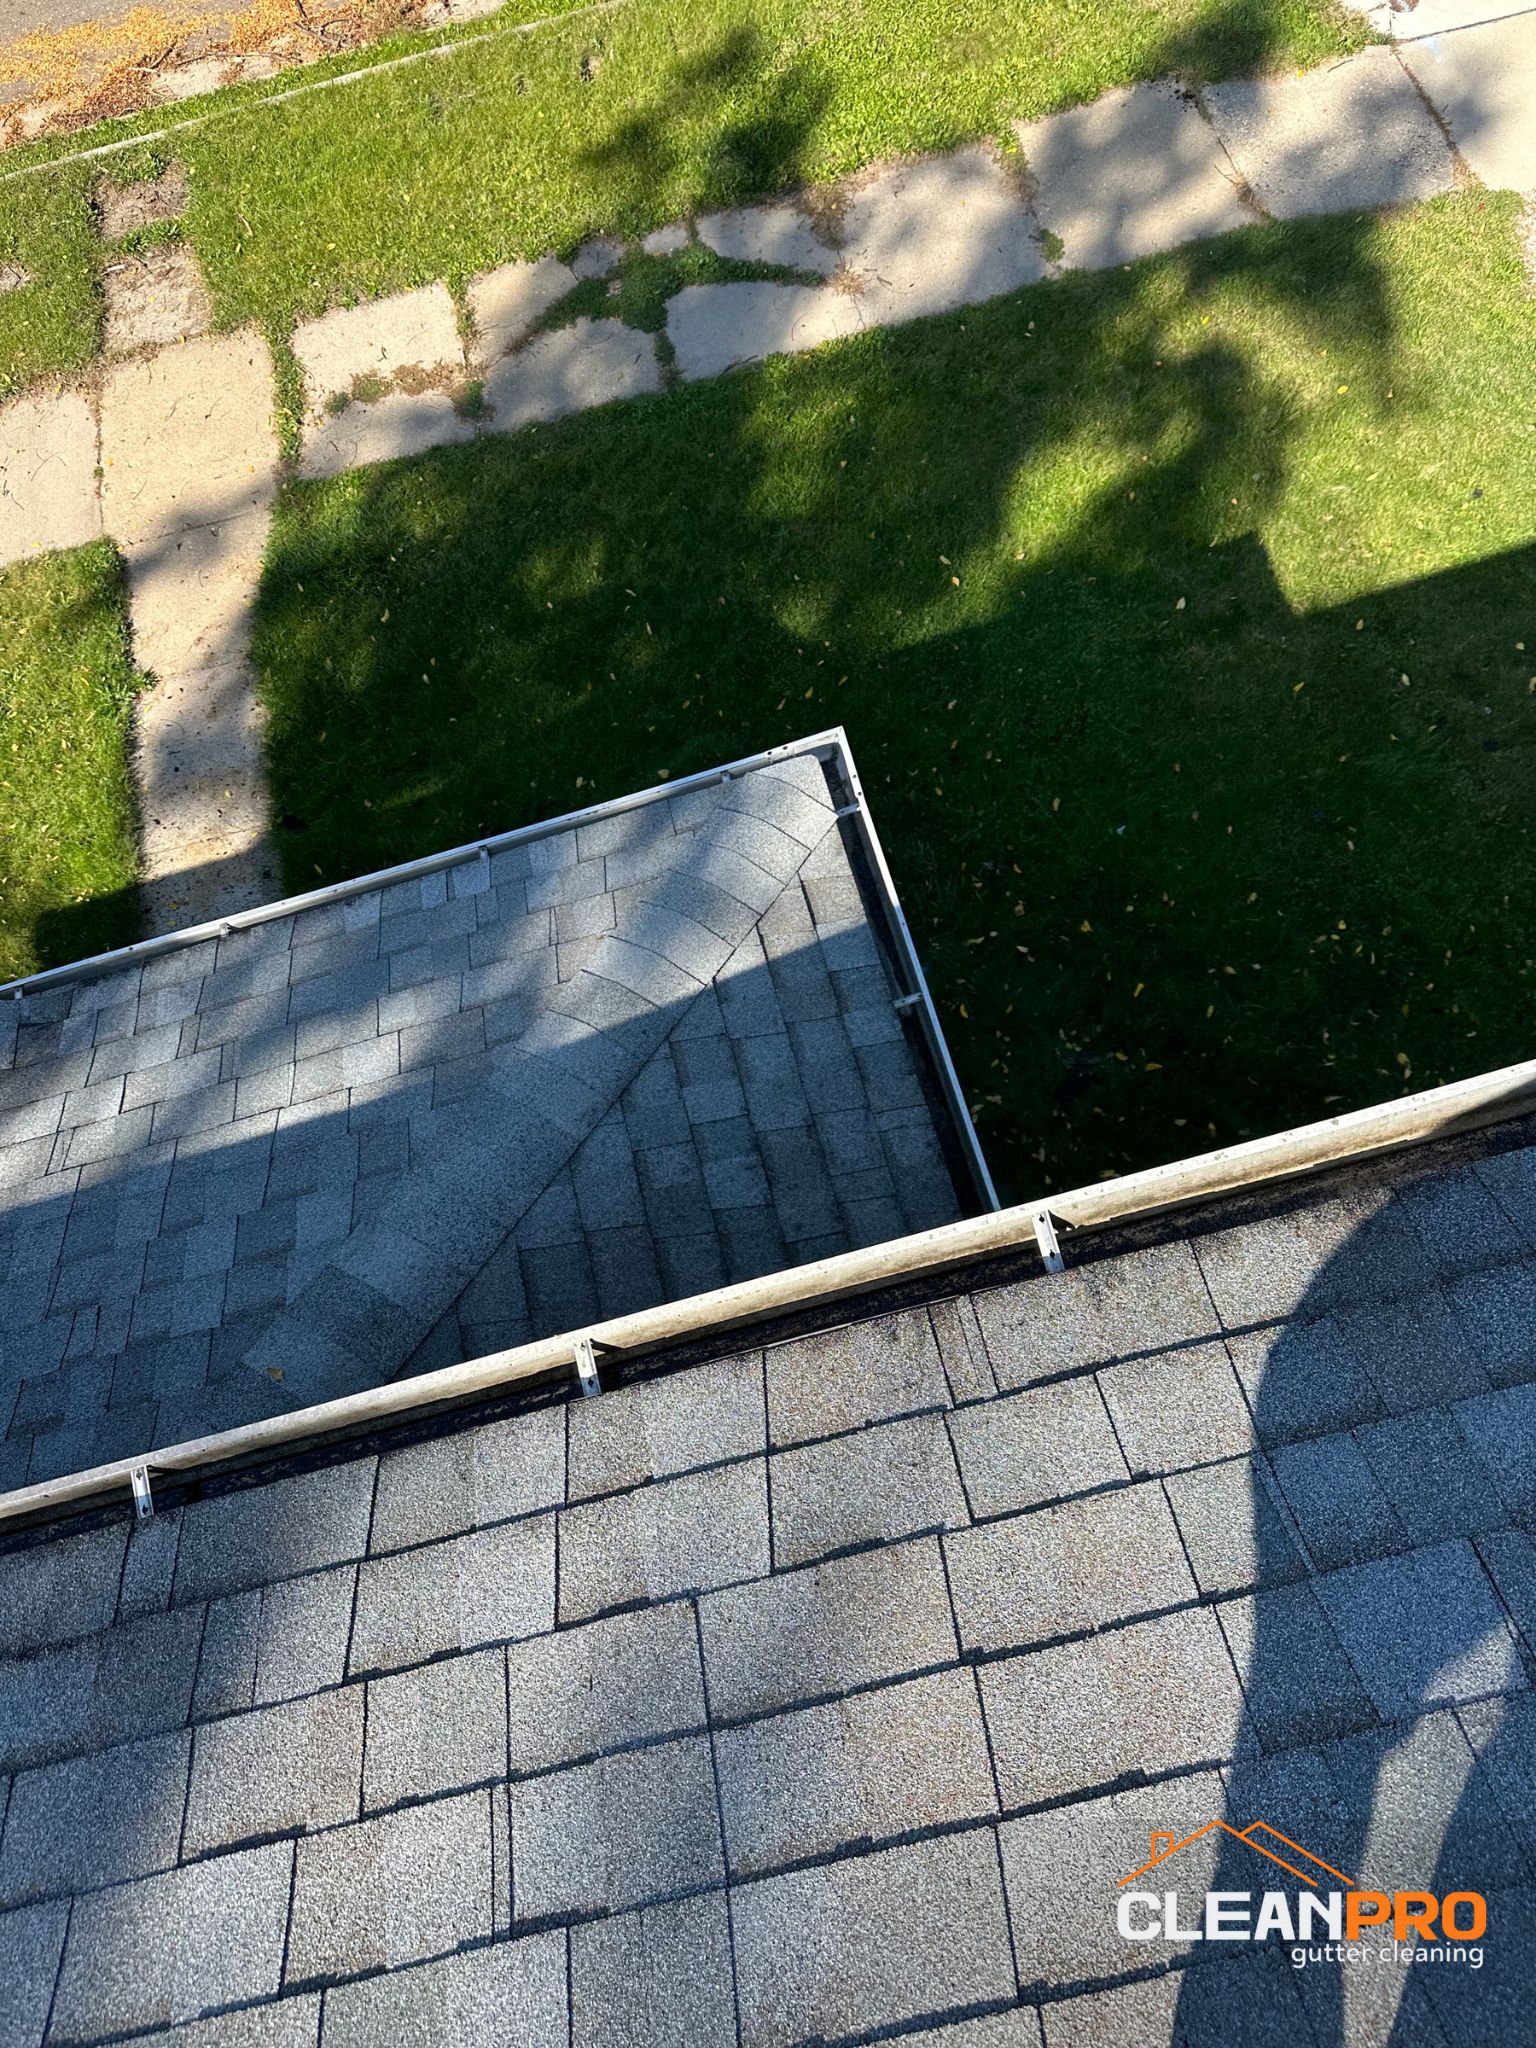 Best Gutter Cleaning Service in Oklahoma City